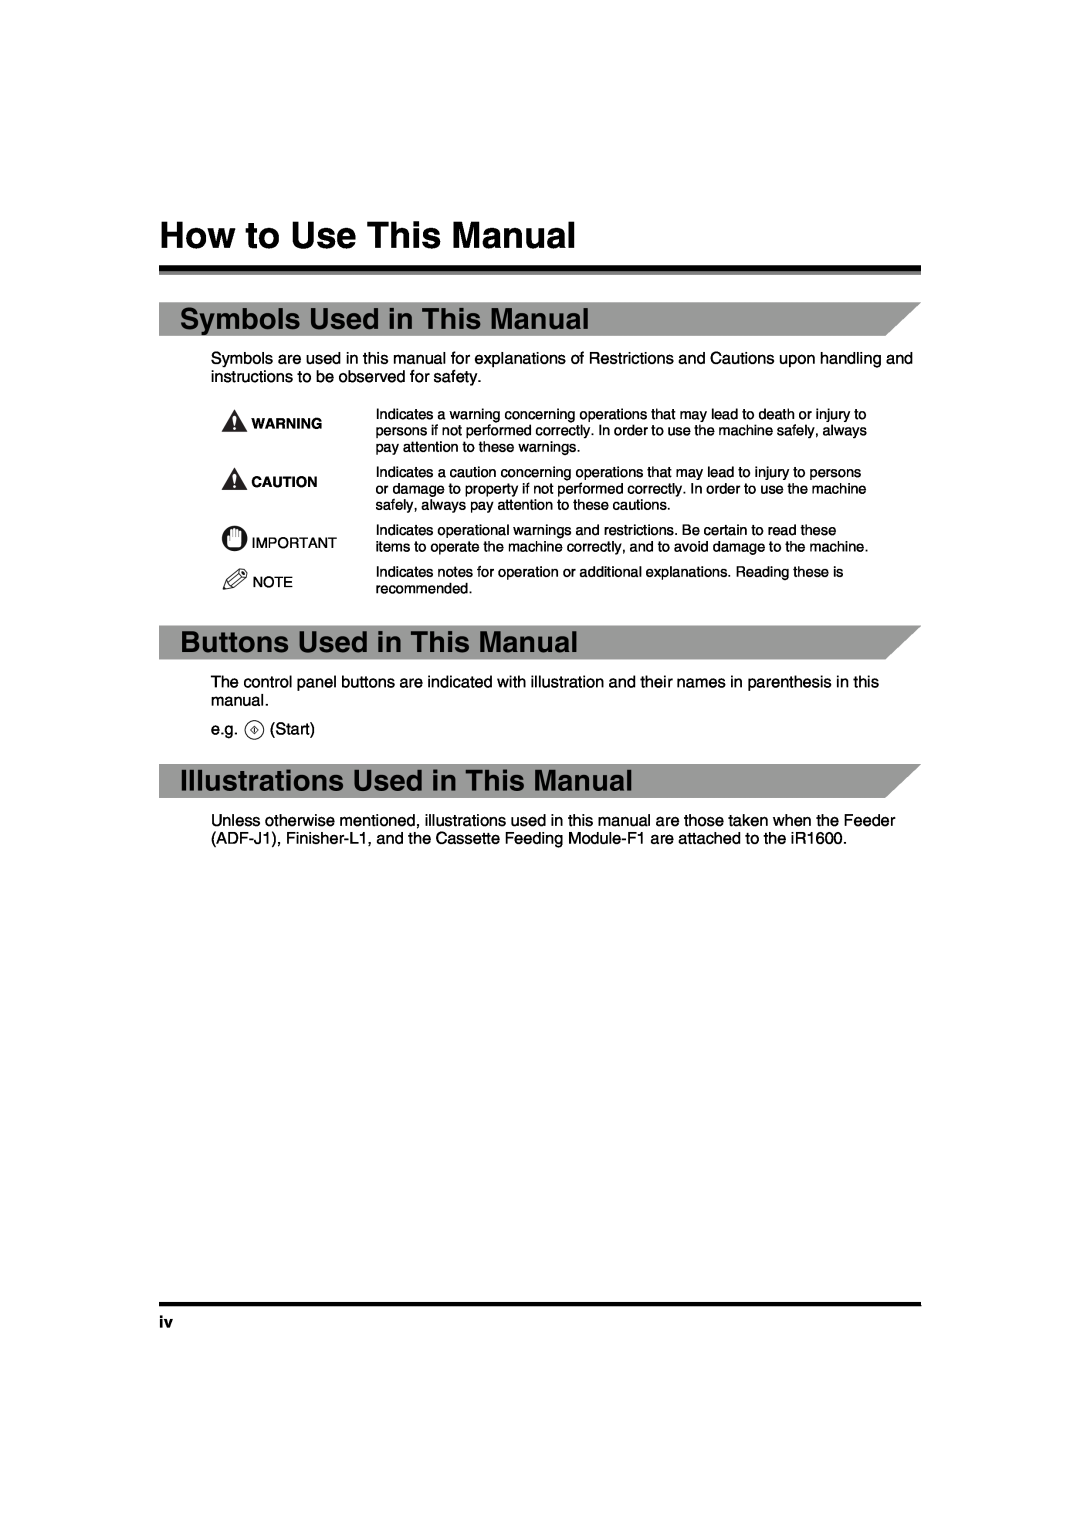 Canon IR1600 manual How to Use This Manual, Symbols Used in This Manual, Buttons Used in This Manual 